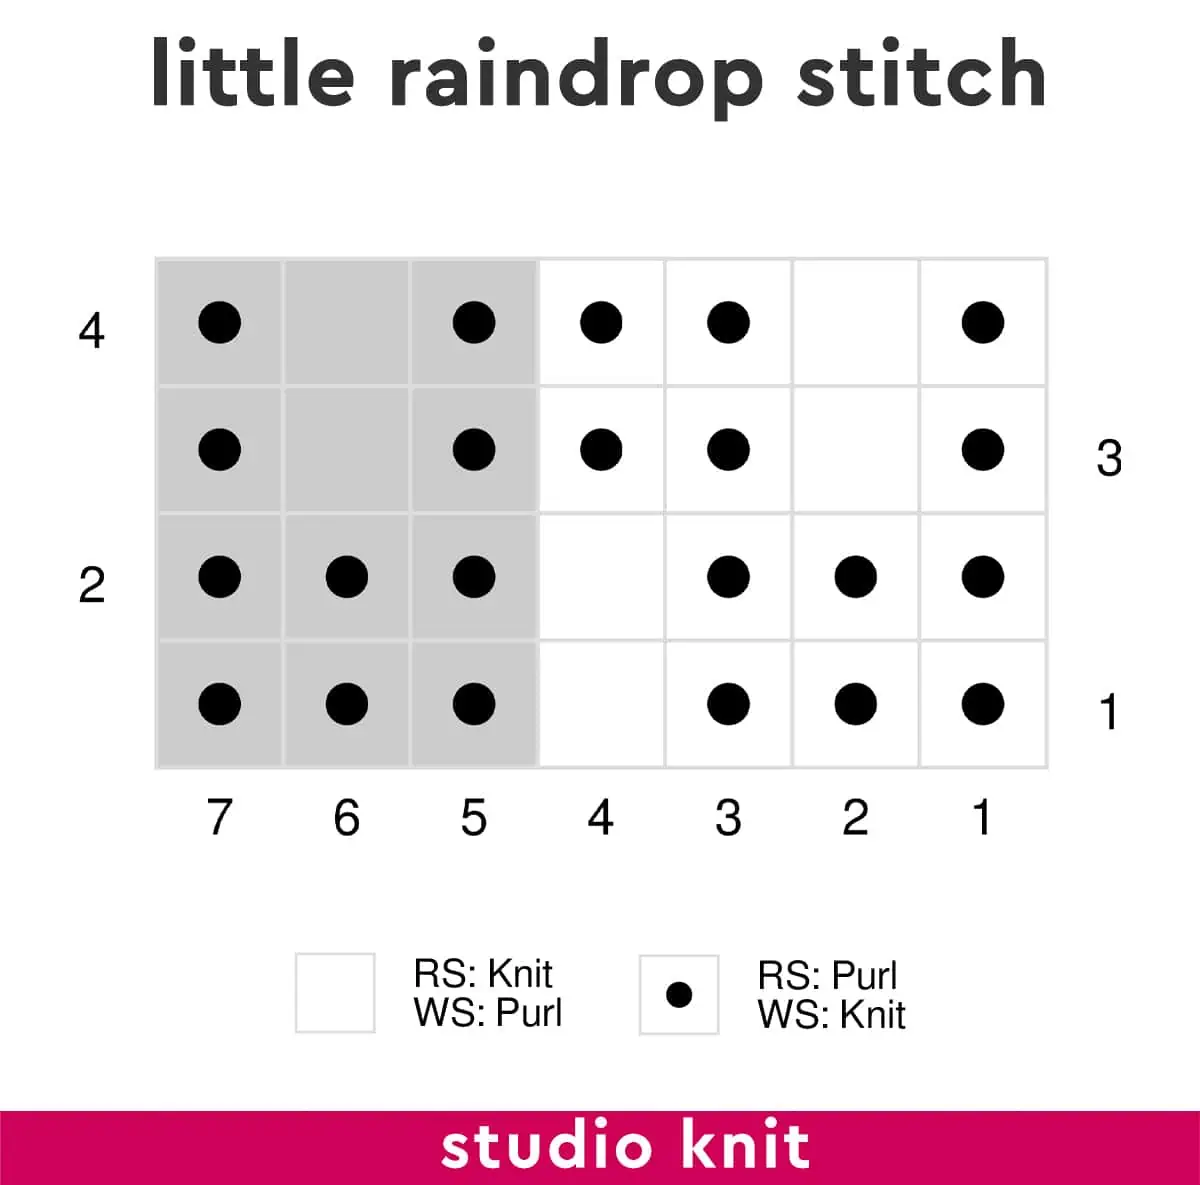 Knitting chart diagram of the Little Raindrop Stitch by Studio Knit.